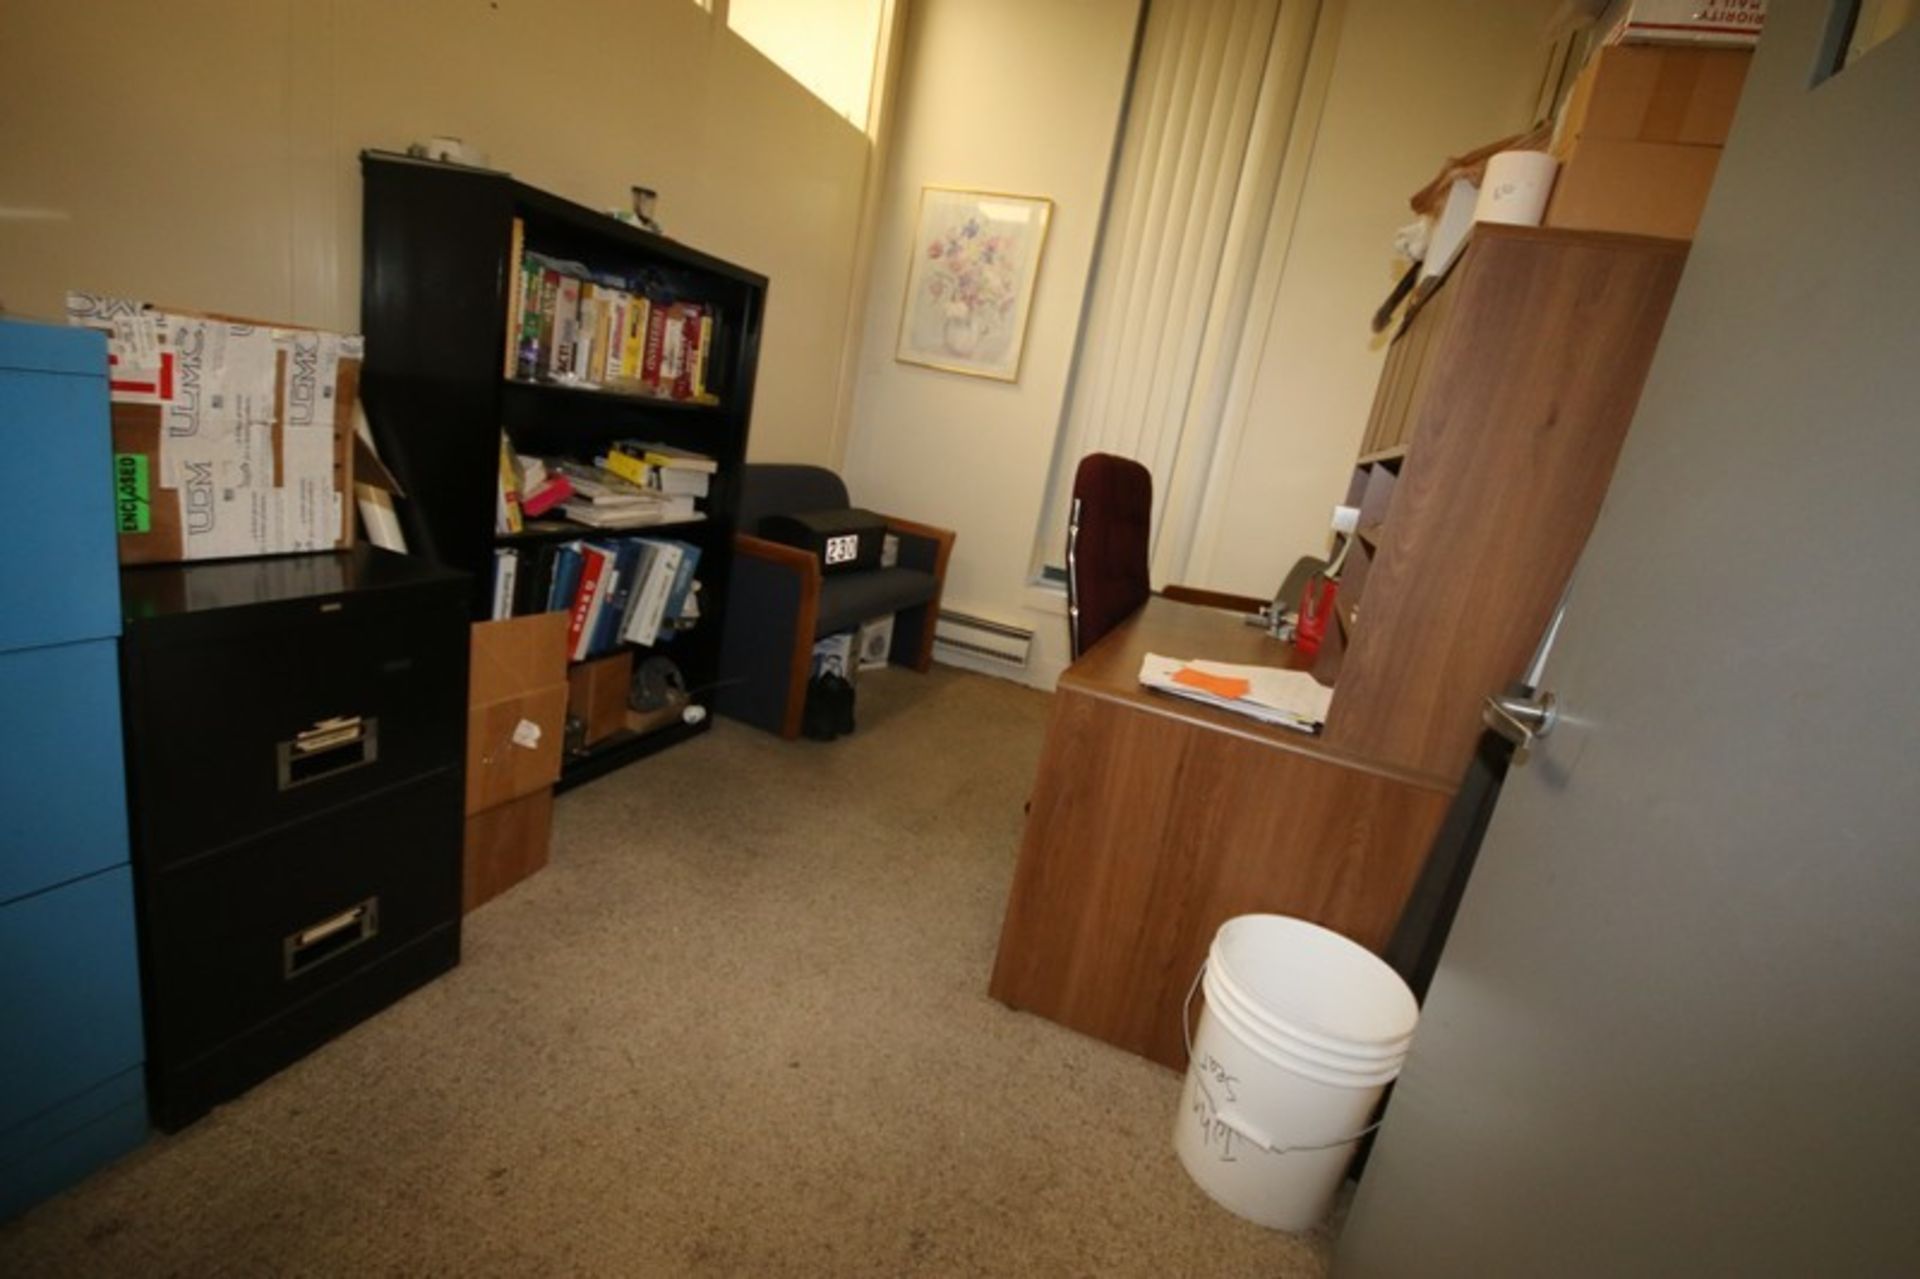 Contents of Room, Includes Spare Cabinets, Horizontal Filing Cabinets, Shelving, Rolling Chair, - Bild 3 aus 3